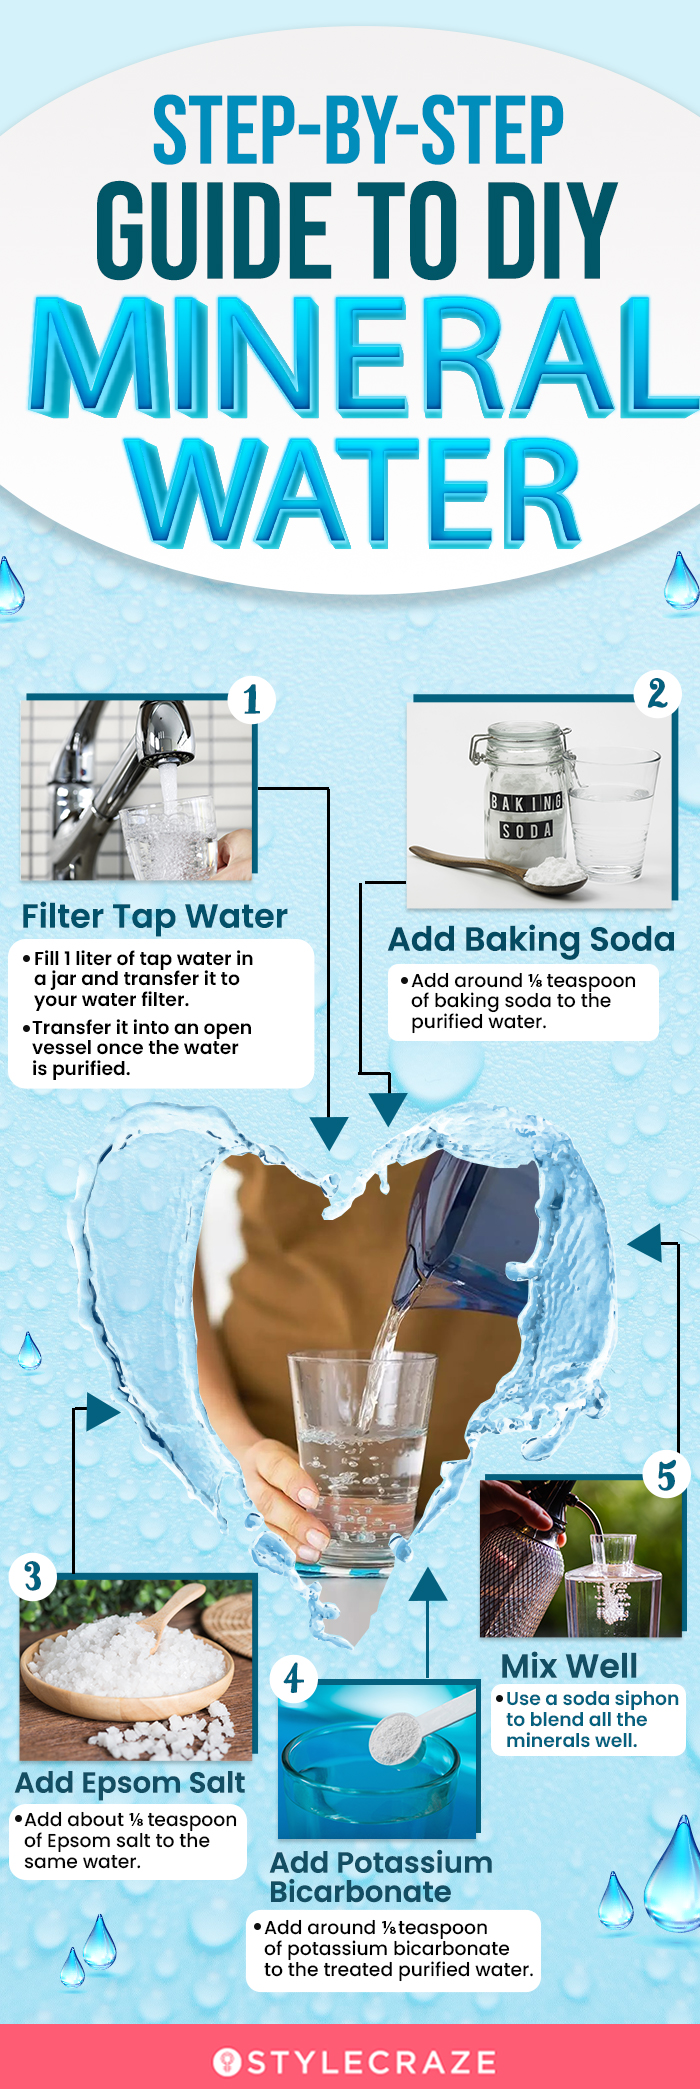 step by step guide to diy mineral water (infographic)